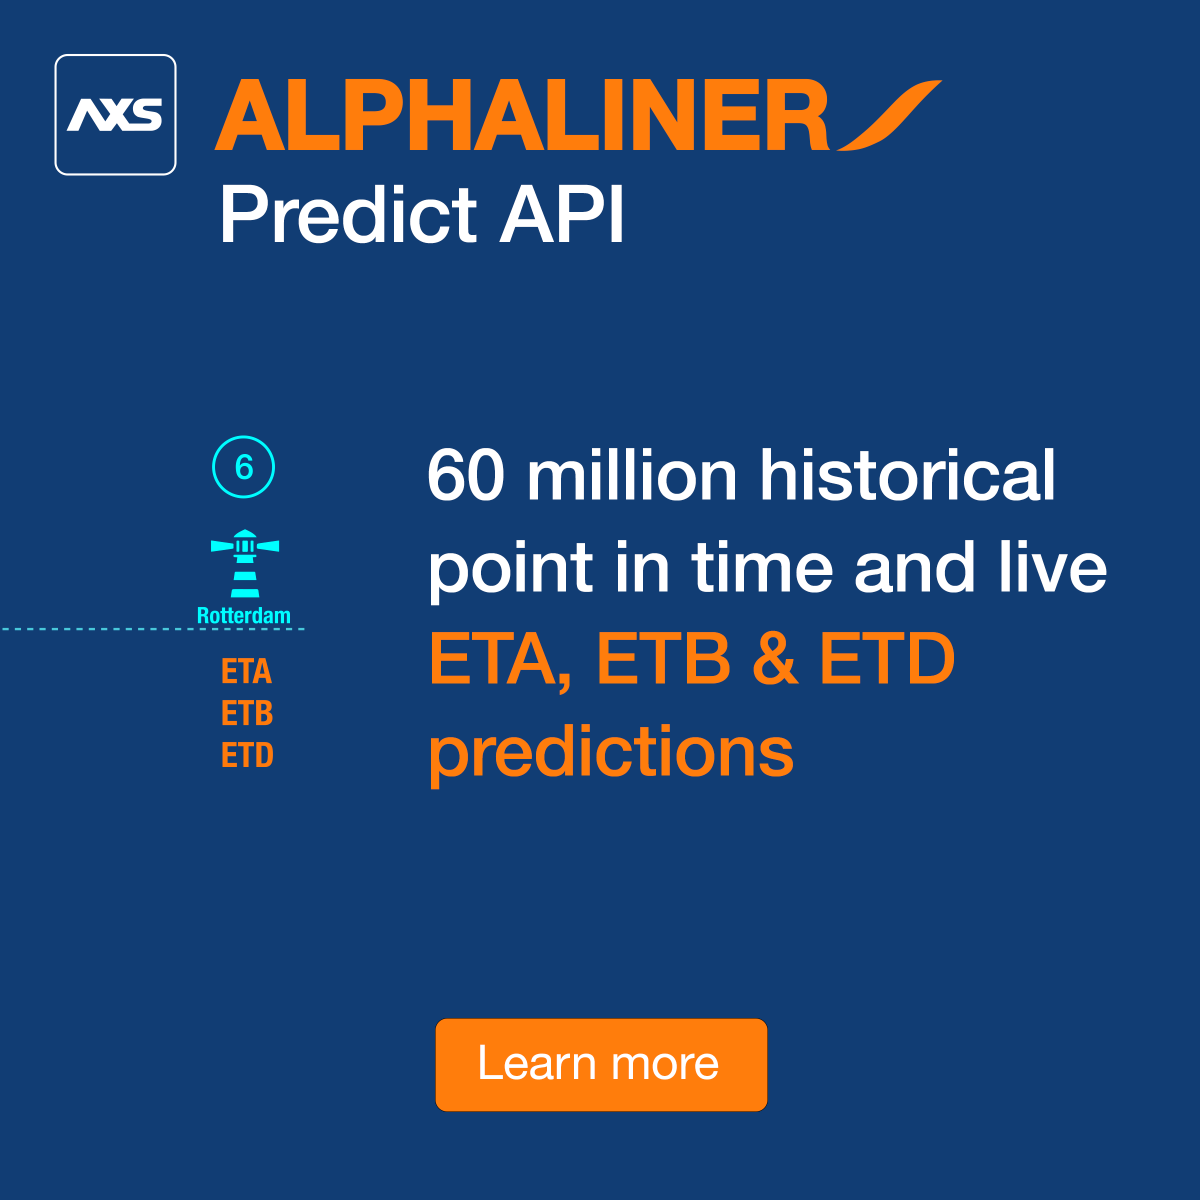 3 of 3
Learn more bit.ly/49I7Dlu 

#containershipping #maritime #shipping #api #prediction #data #ports #liners